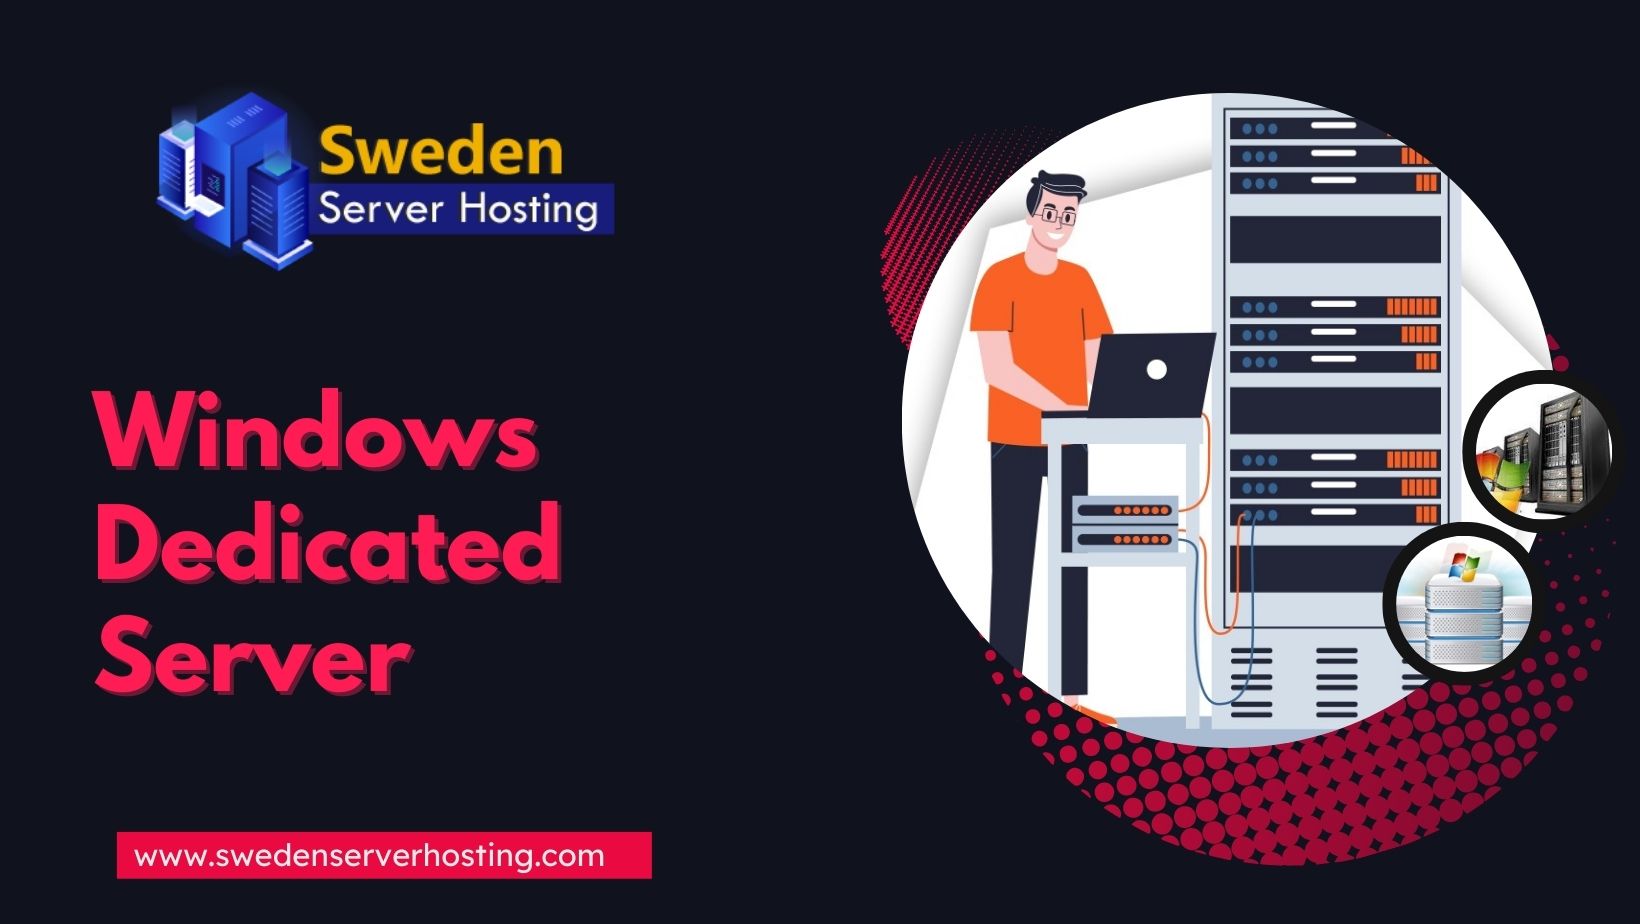 Windows Dedicated Server: What You Get from Sweden Server Hosting – Why It’s The Right Choice